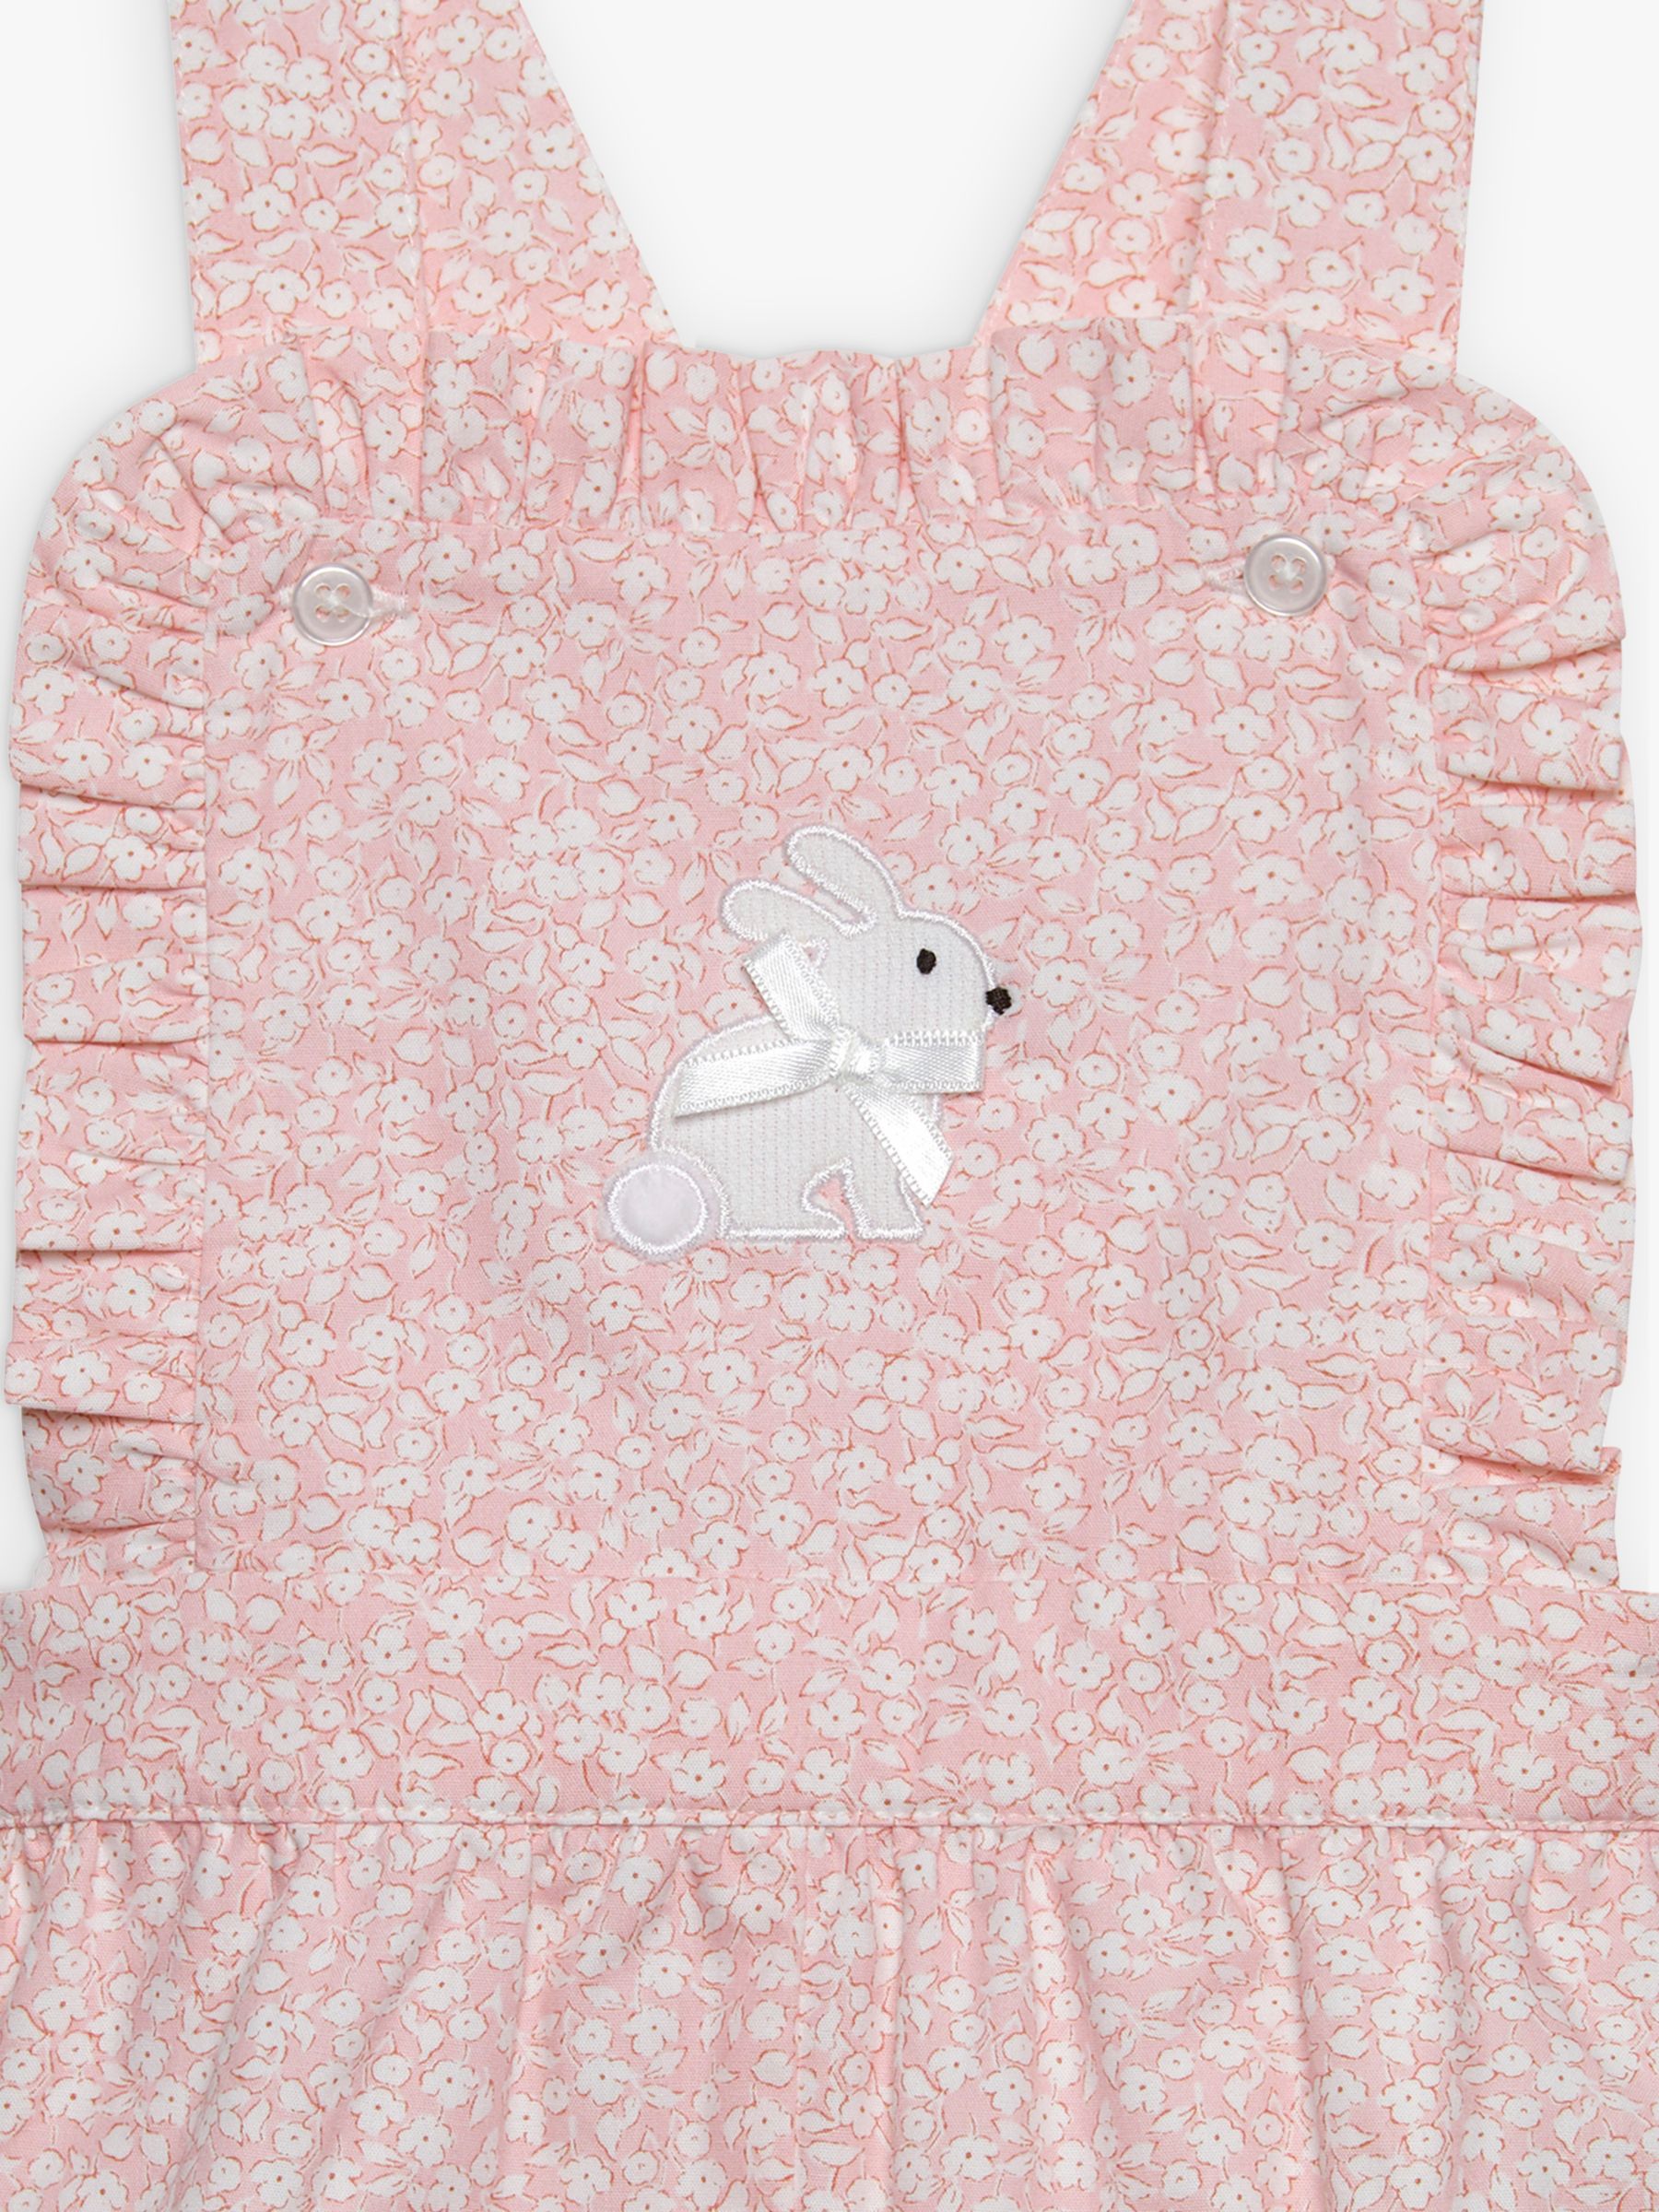 Buy Trotters Baby Bunny Frill Floral Print Bib Shorts, Pink./White Online at johnlewis.com